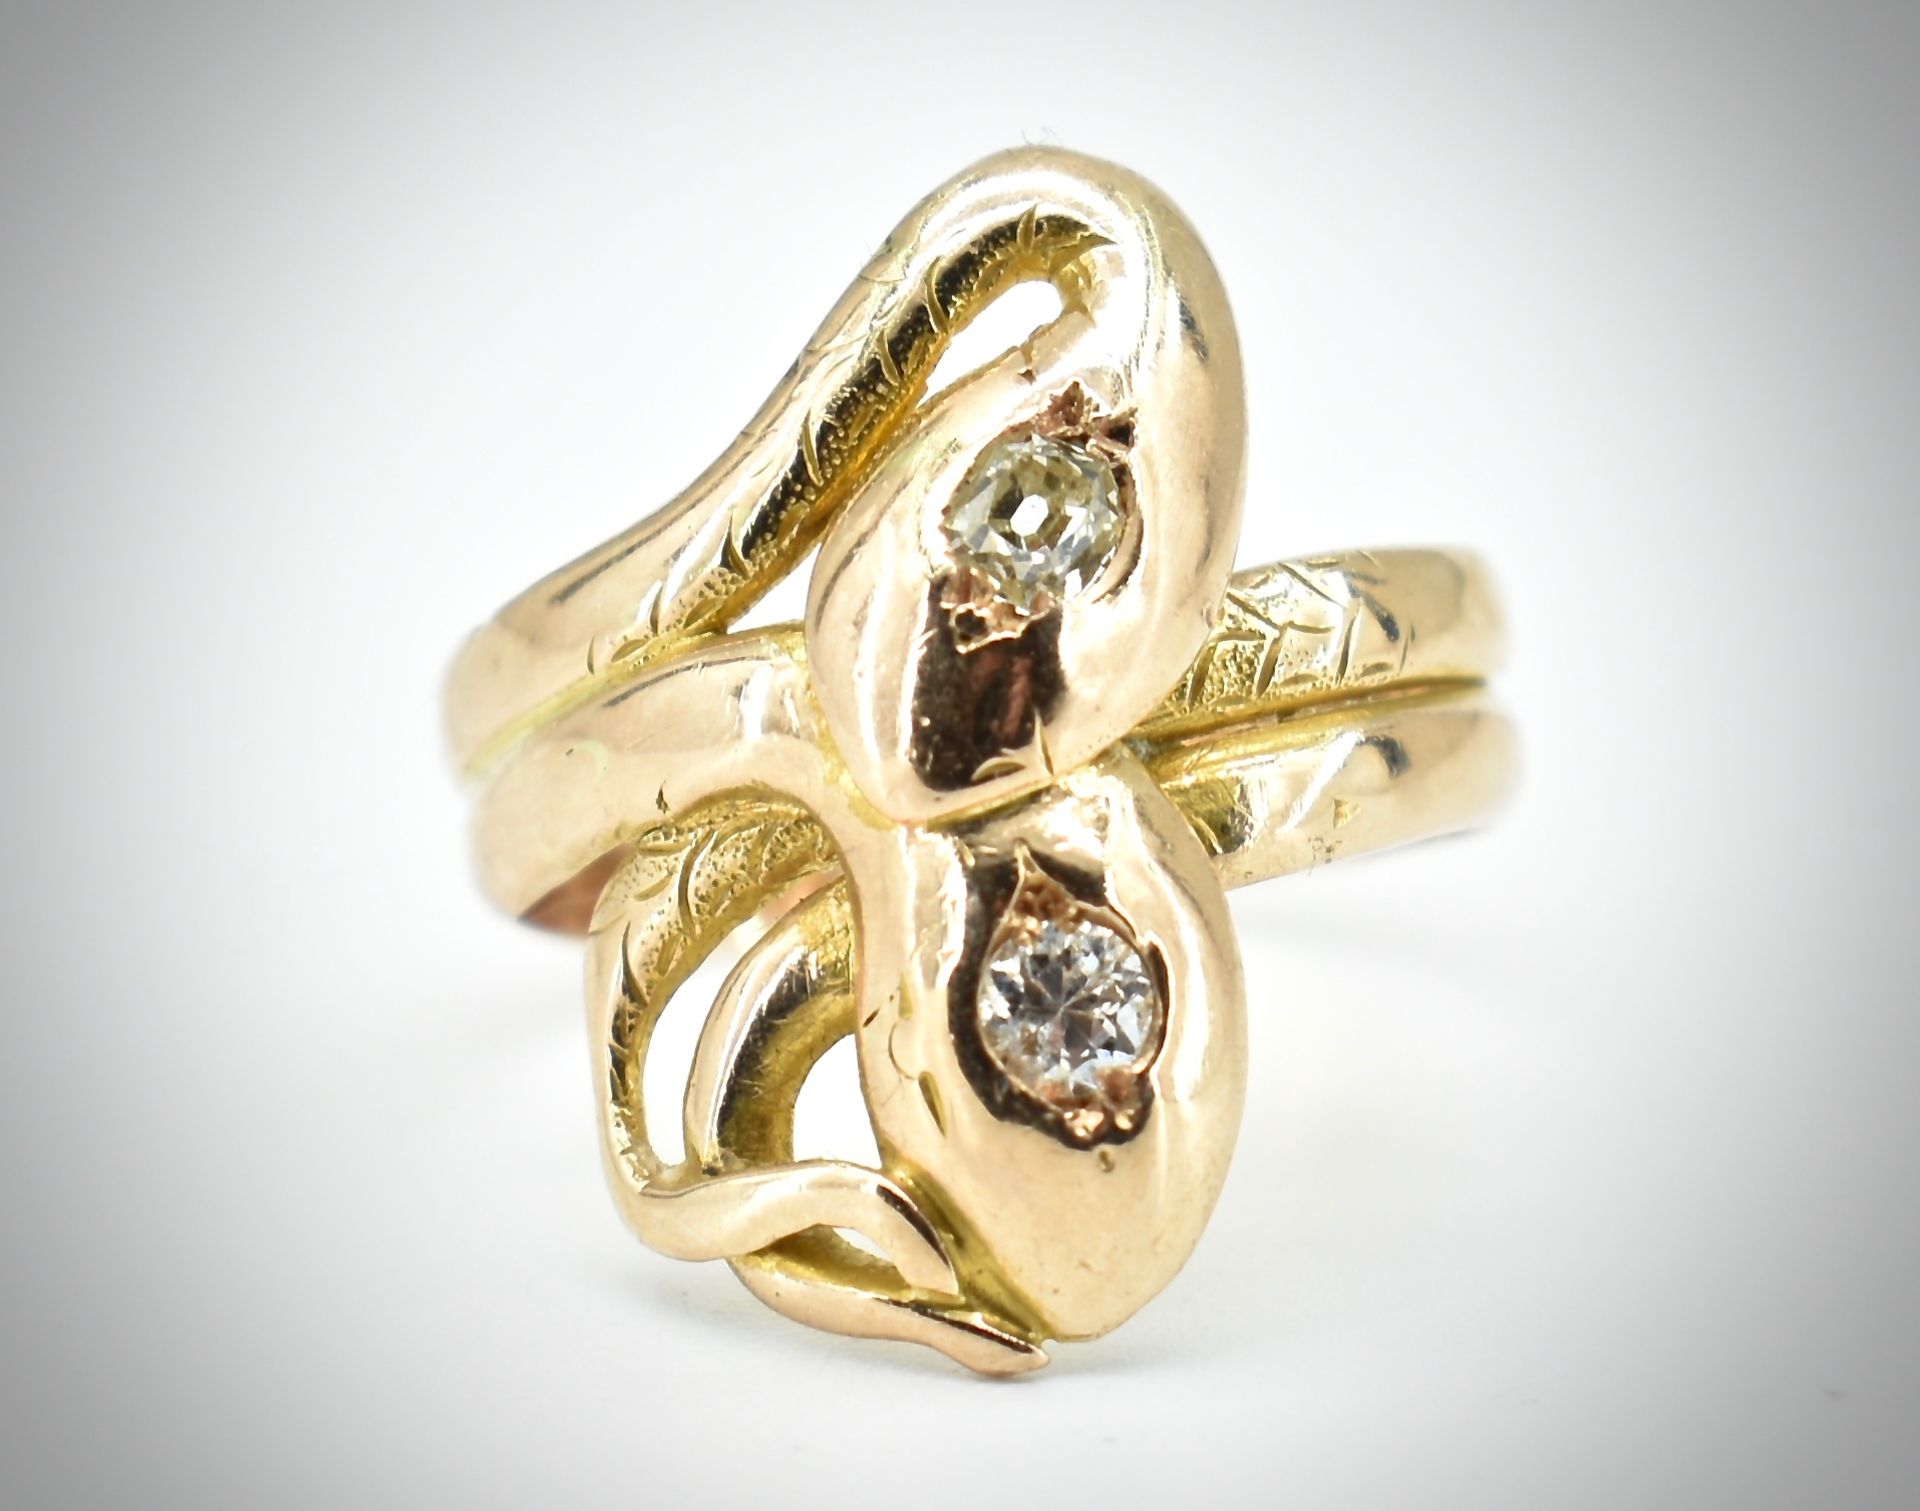 Victorian 18ct Gold & Diamond Art Nouveau Snake Ring - Image 2 of 5